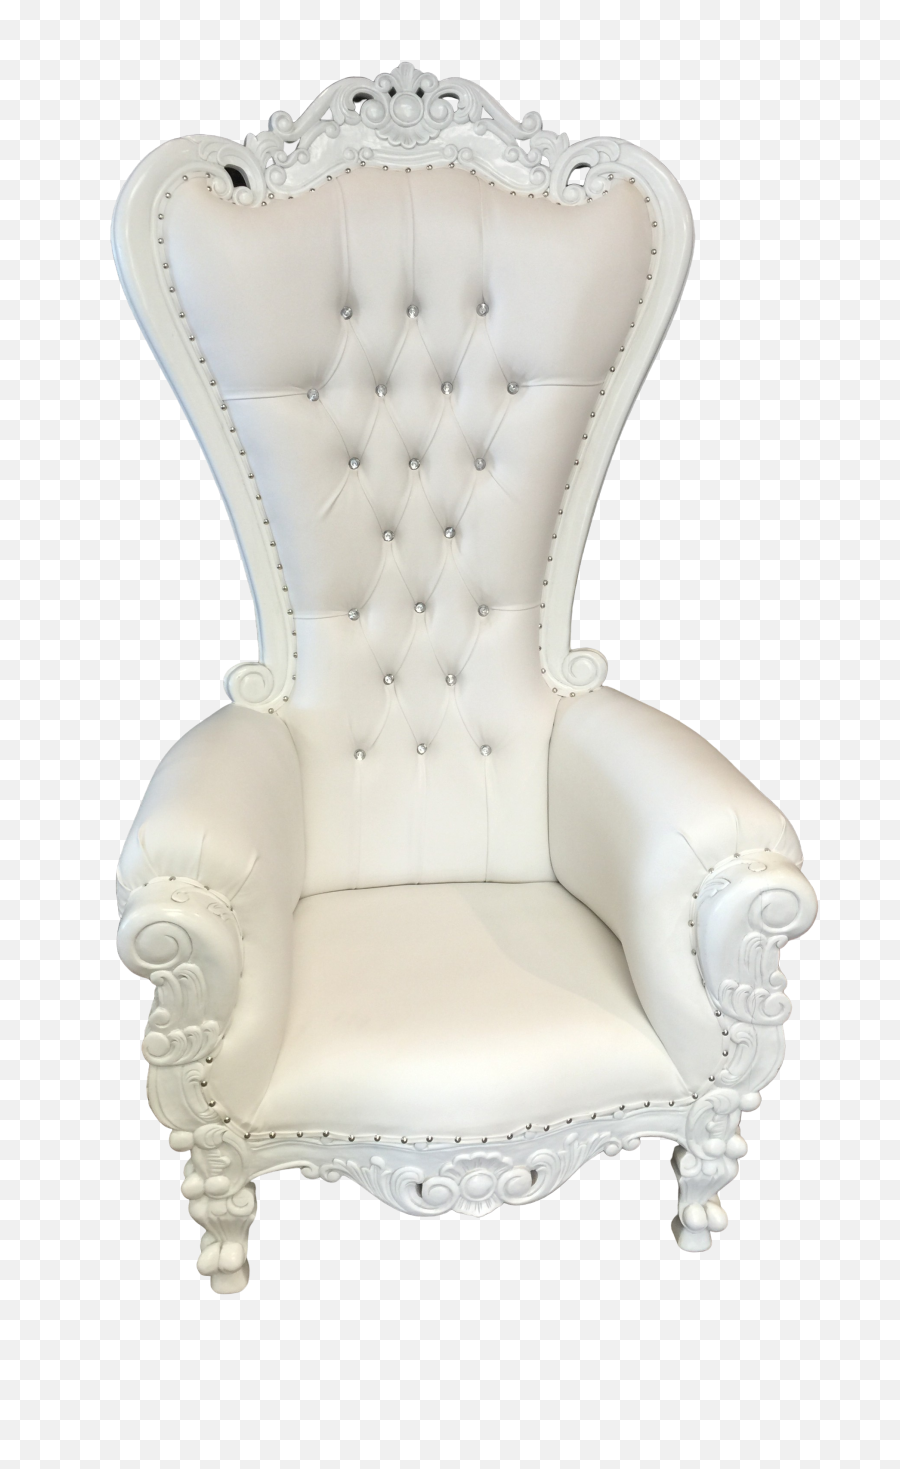 Victorian Throne Chair - Throne Chair For Sale Png,Throne Chair Png